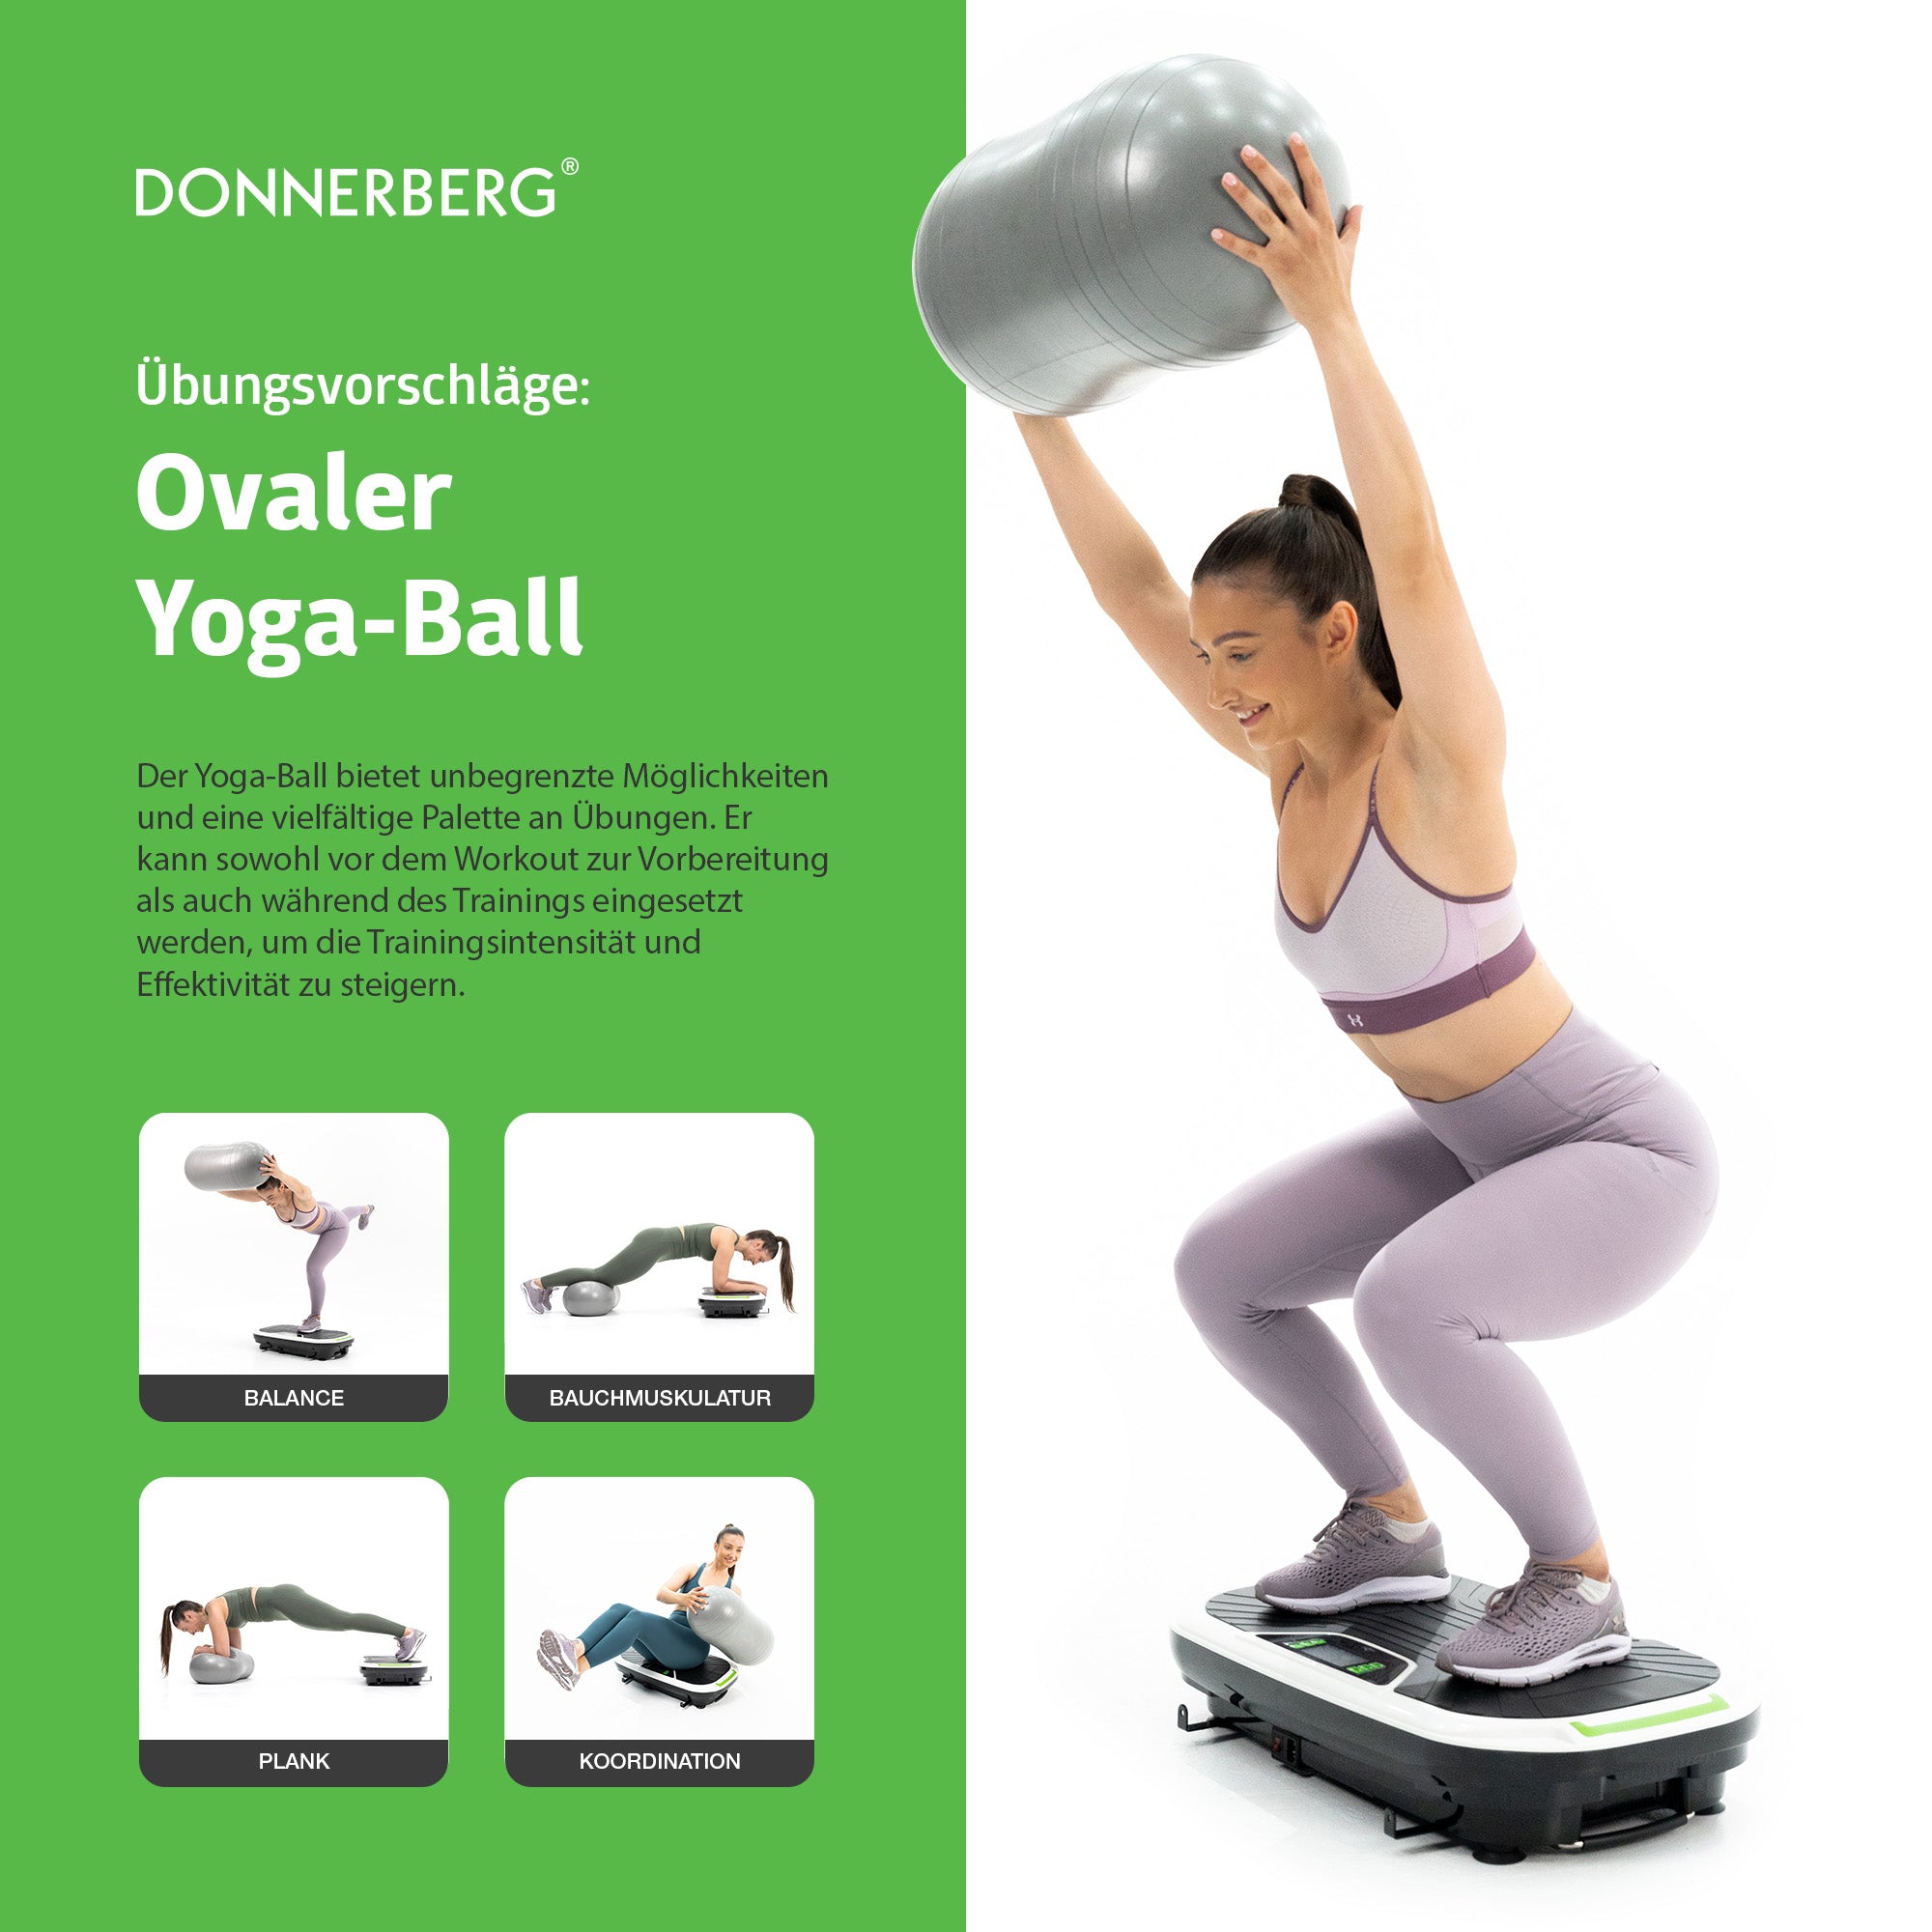 Suggestions for exercises with oval yoga ball on vibro exercise machine